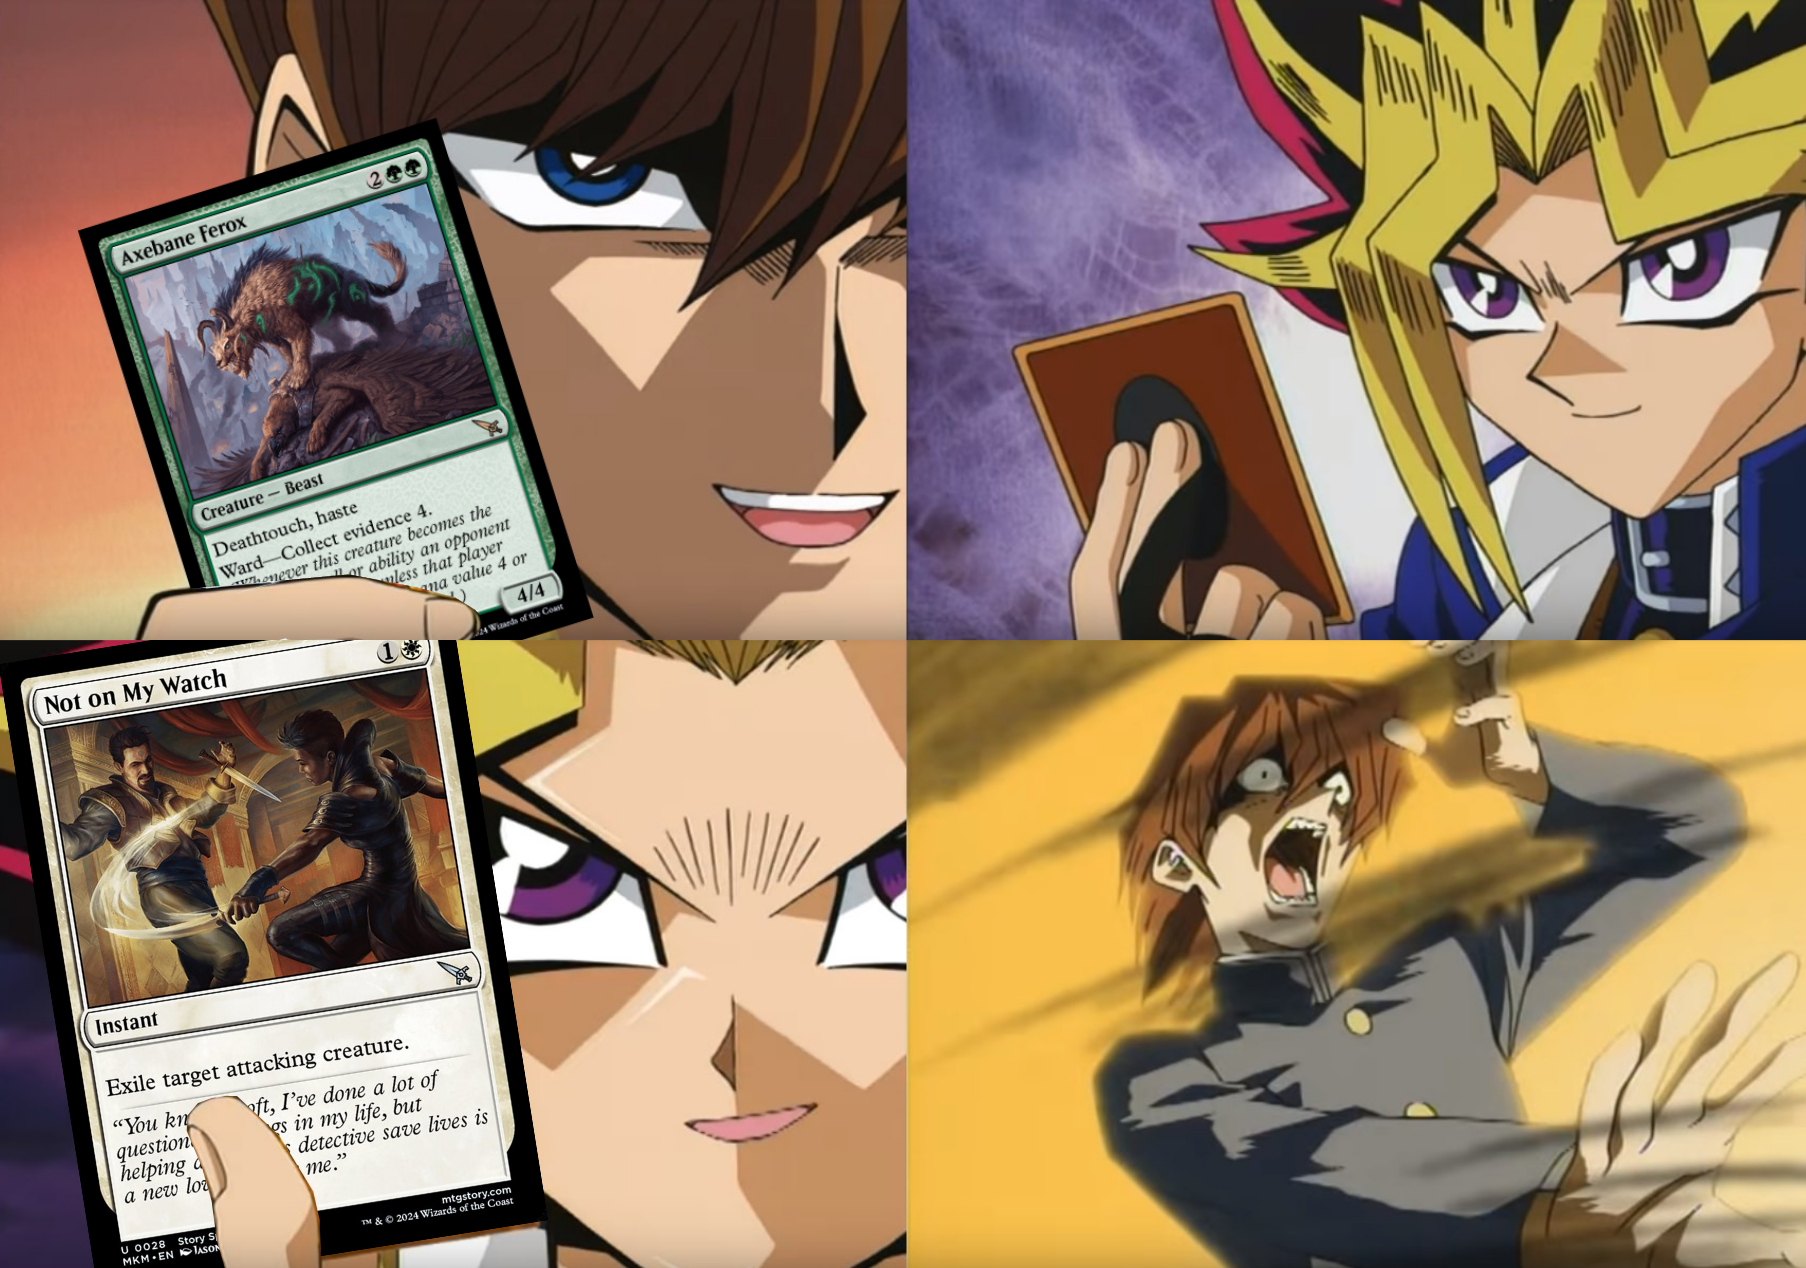 The Kaiba defeat yugioh meme, but with magic the gathering cards